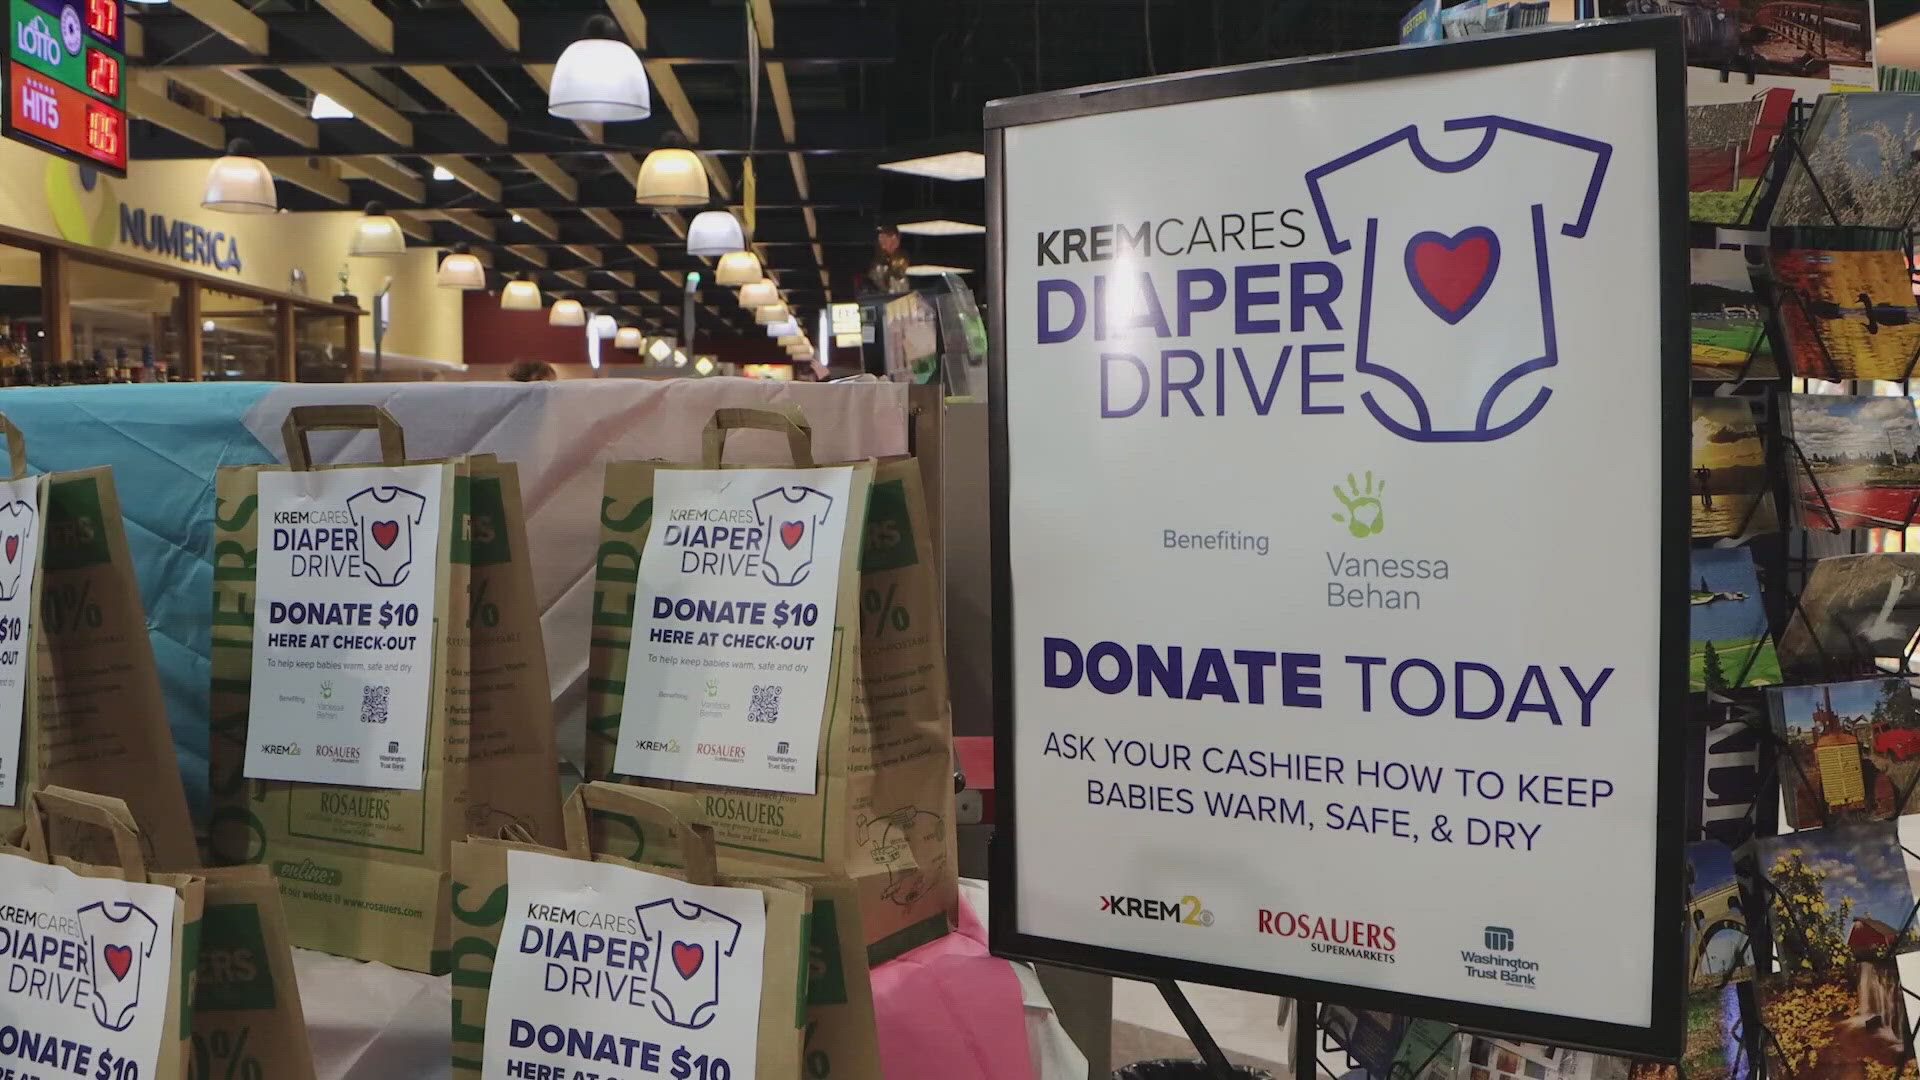 The KREM Cares 'Diaper Drive' raised enough money for more than 275,000 diapers. A huge thank you to our viewers for donating to help support local families.